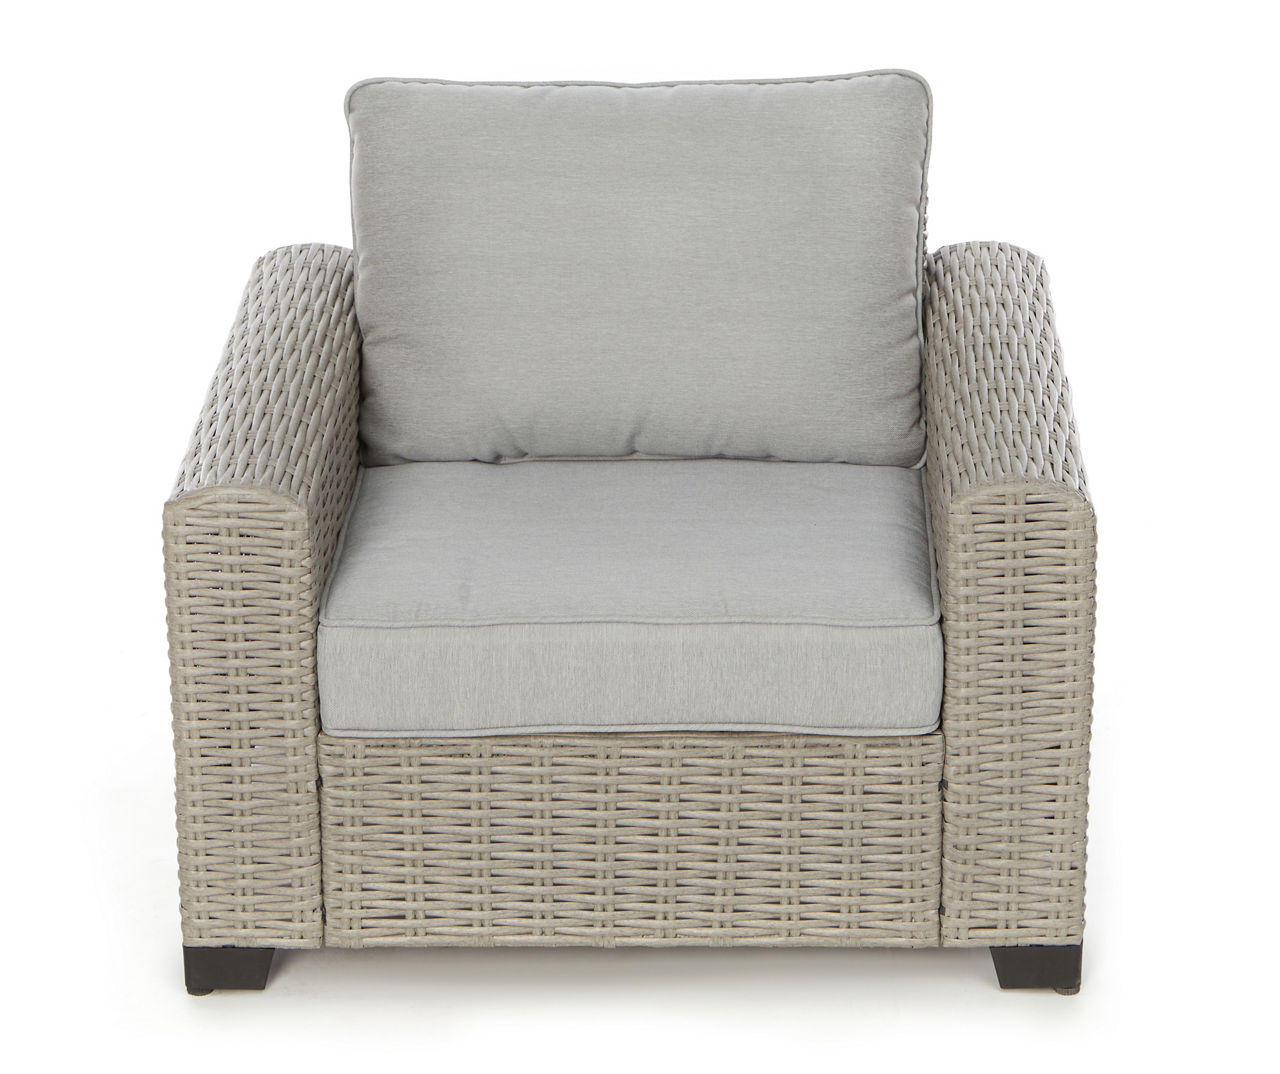 Pembroke Light All-Weather Wicker Cushioned Patio Lounge Chair